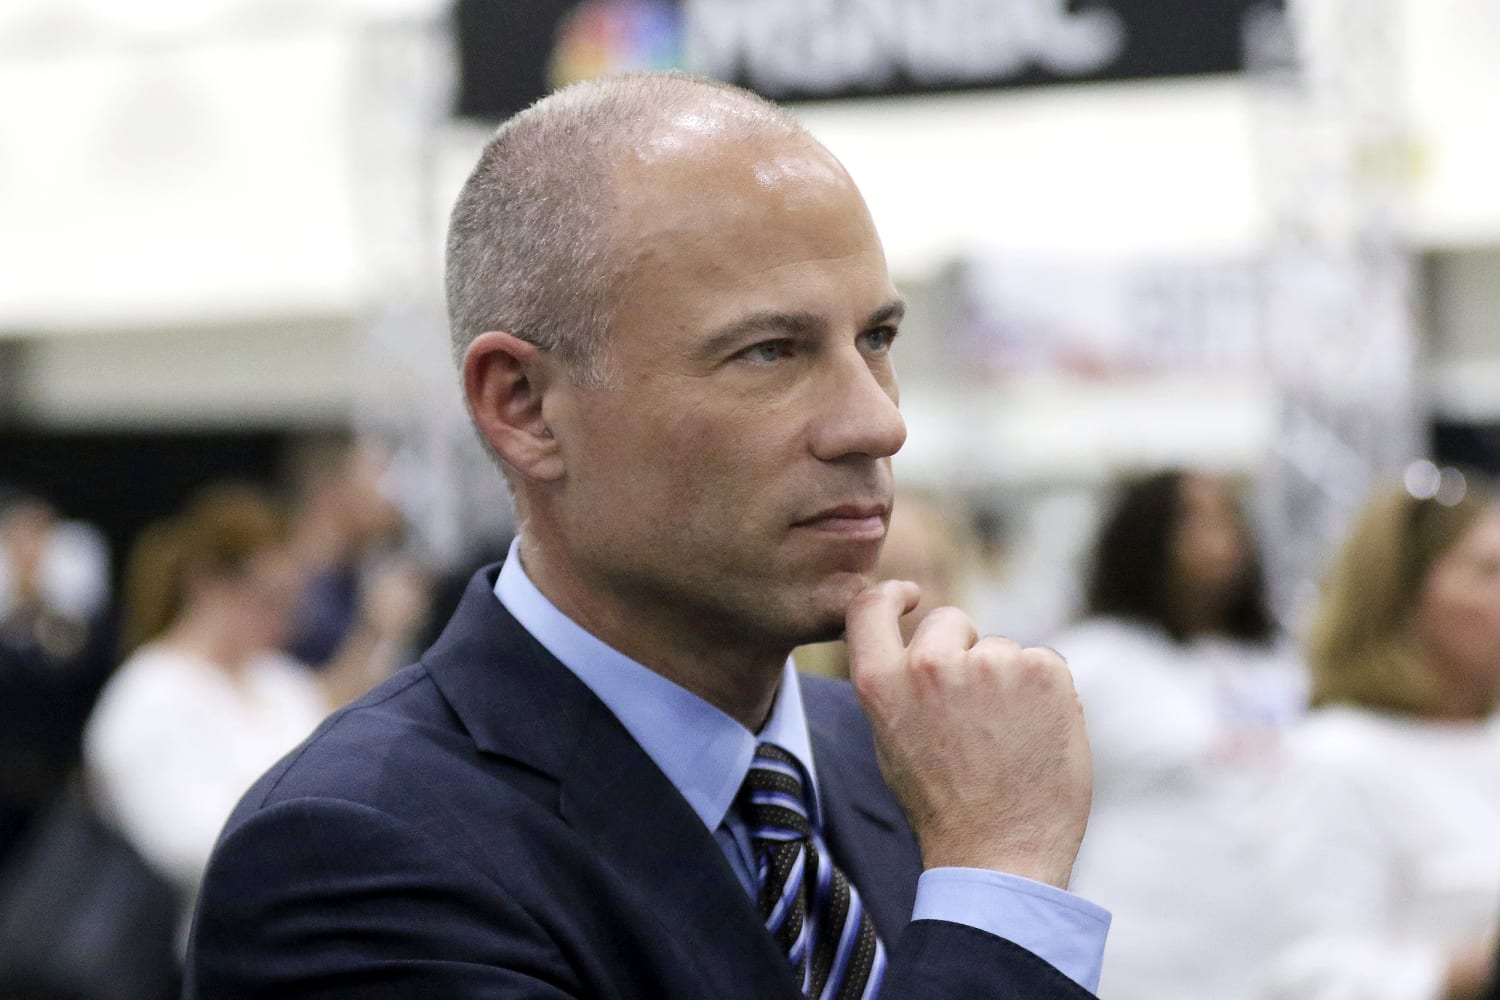 Michael Avenatti arrested by Los Angeles police for alleged domestic abuse2500 x 1667